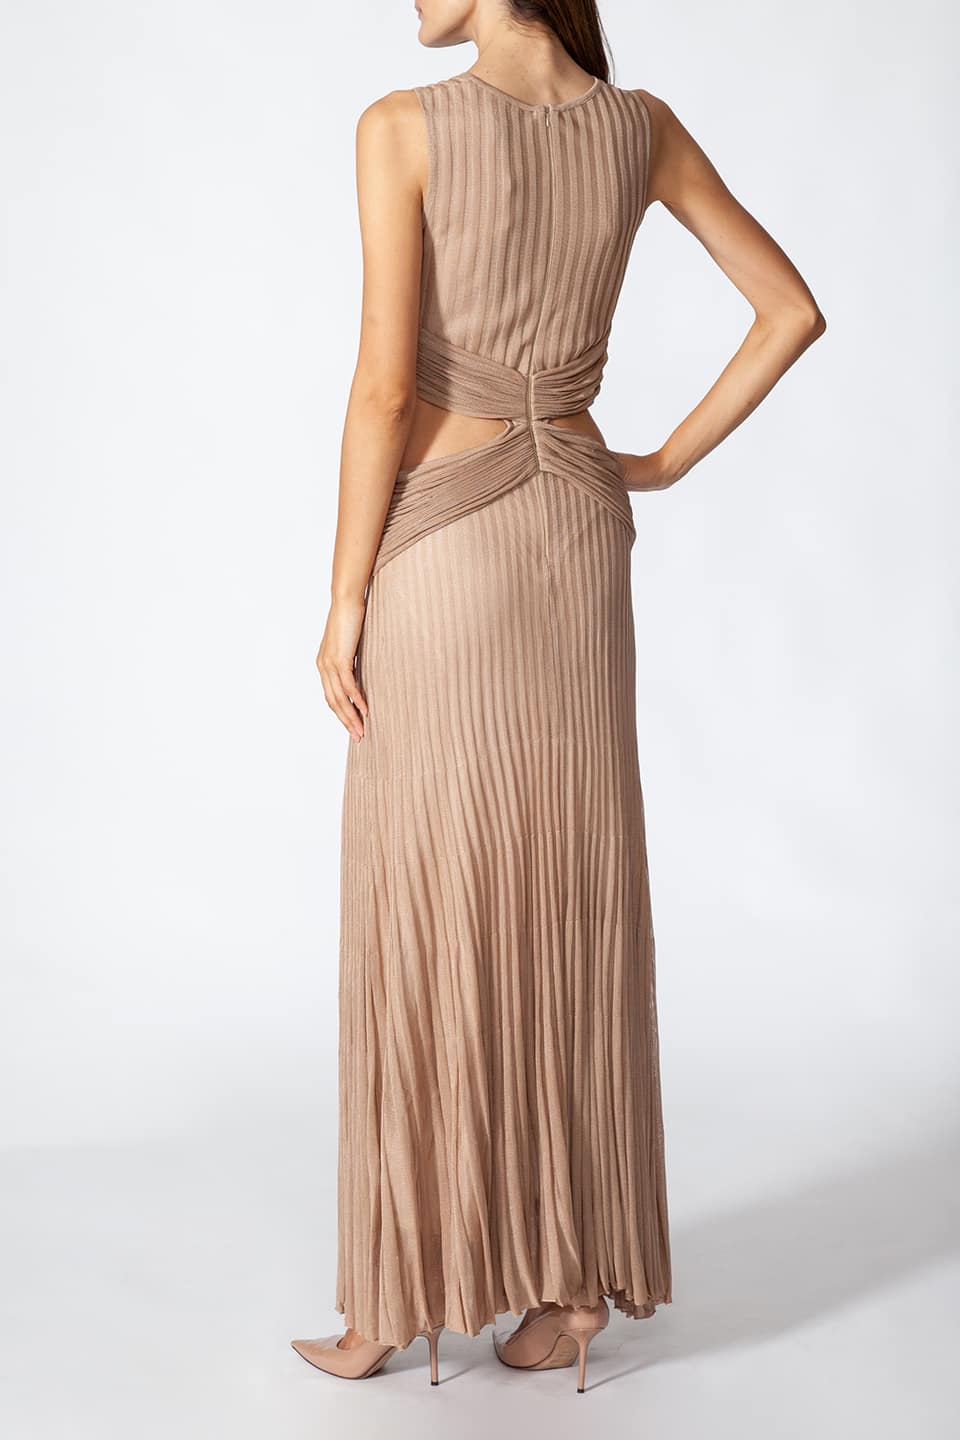 Thumbnail for Product gallery 6, Model in pose from behind wearing Fashion Stylist Kukhareva London's elegant gold dress. Long evening dress crafted from gold viscose blend featuring round neckline.